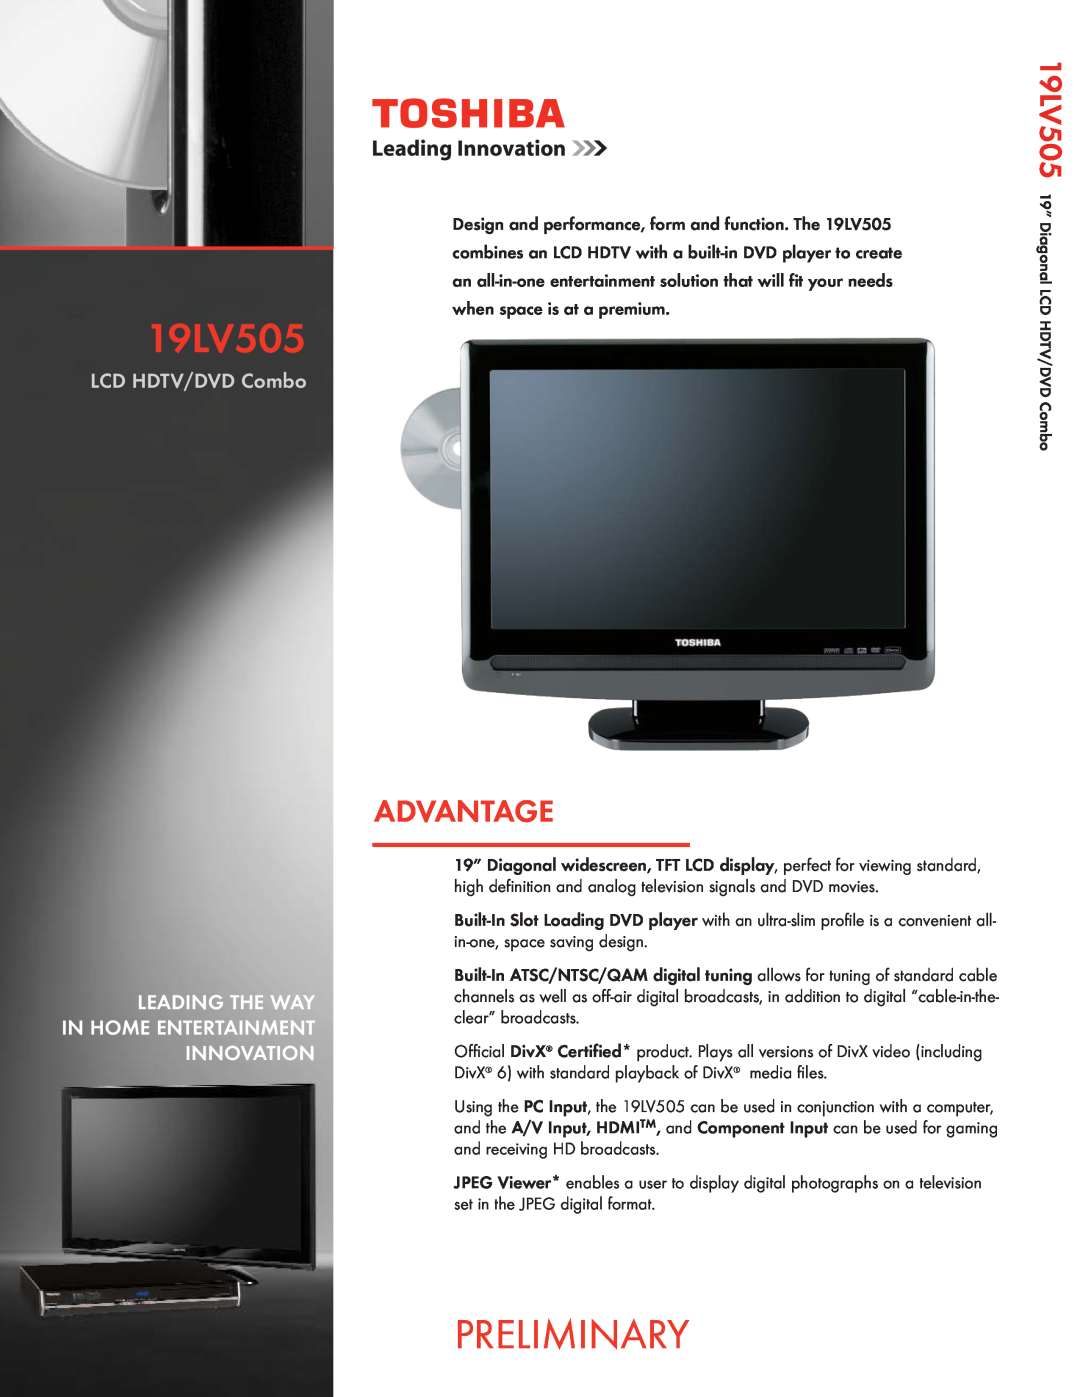 Toshiba 19LV505 manual Preliminary, Advantage, LCD HDTV/DVD Combo, Leading The Way In Home Entertainment Innovation 